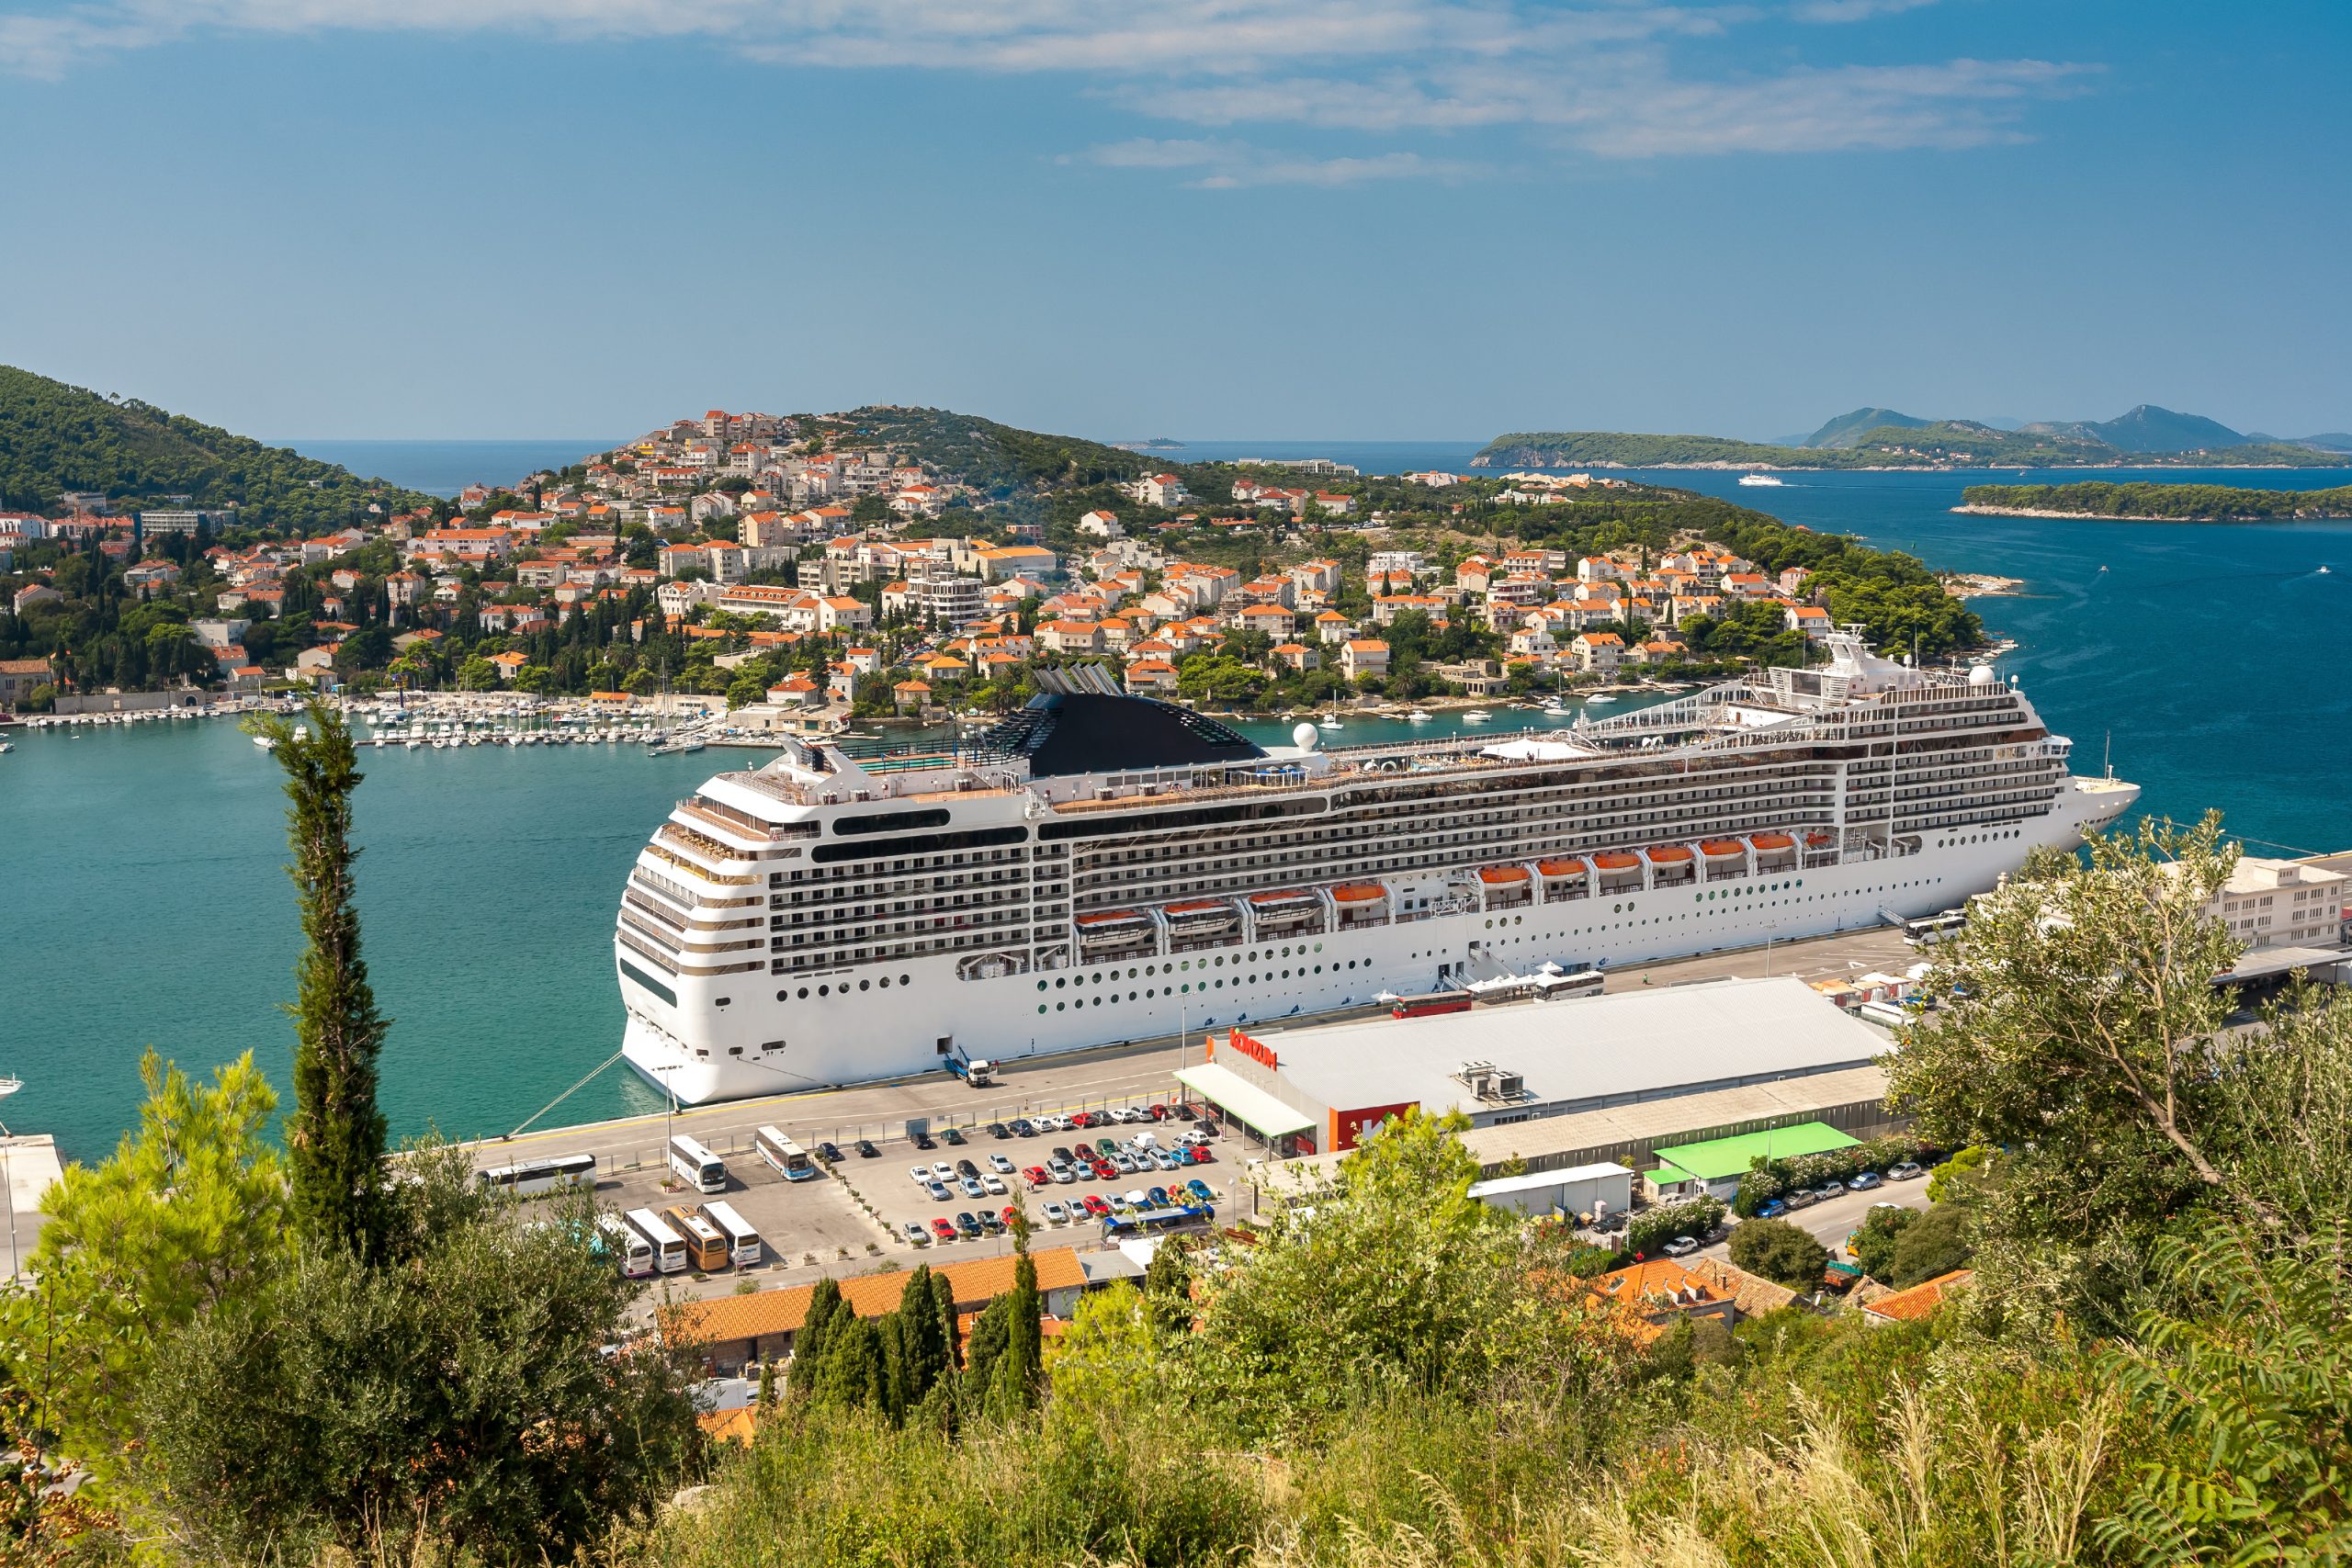 Getting the Most Out of Your Stay in Cruise Ports